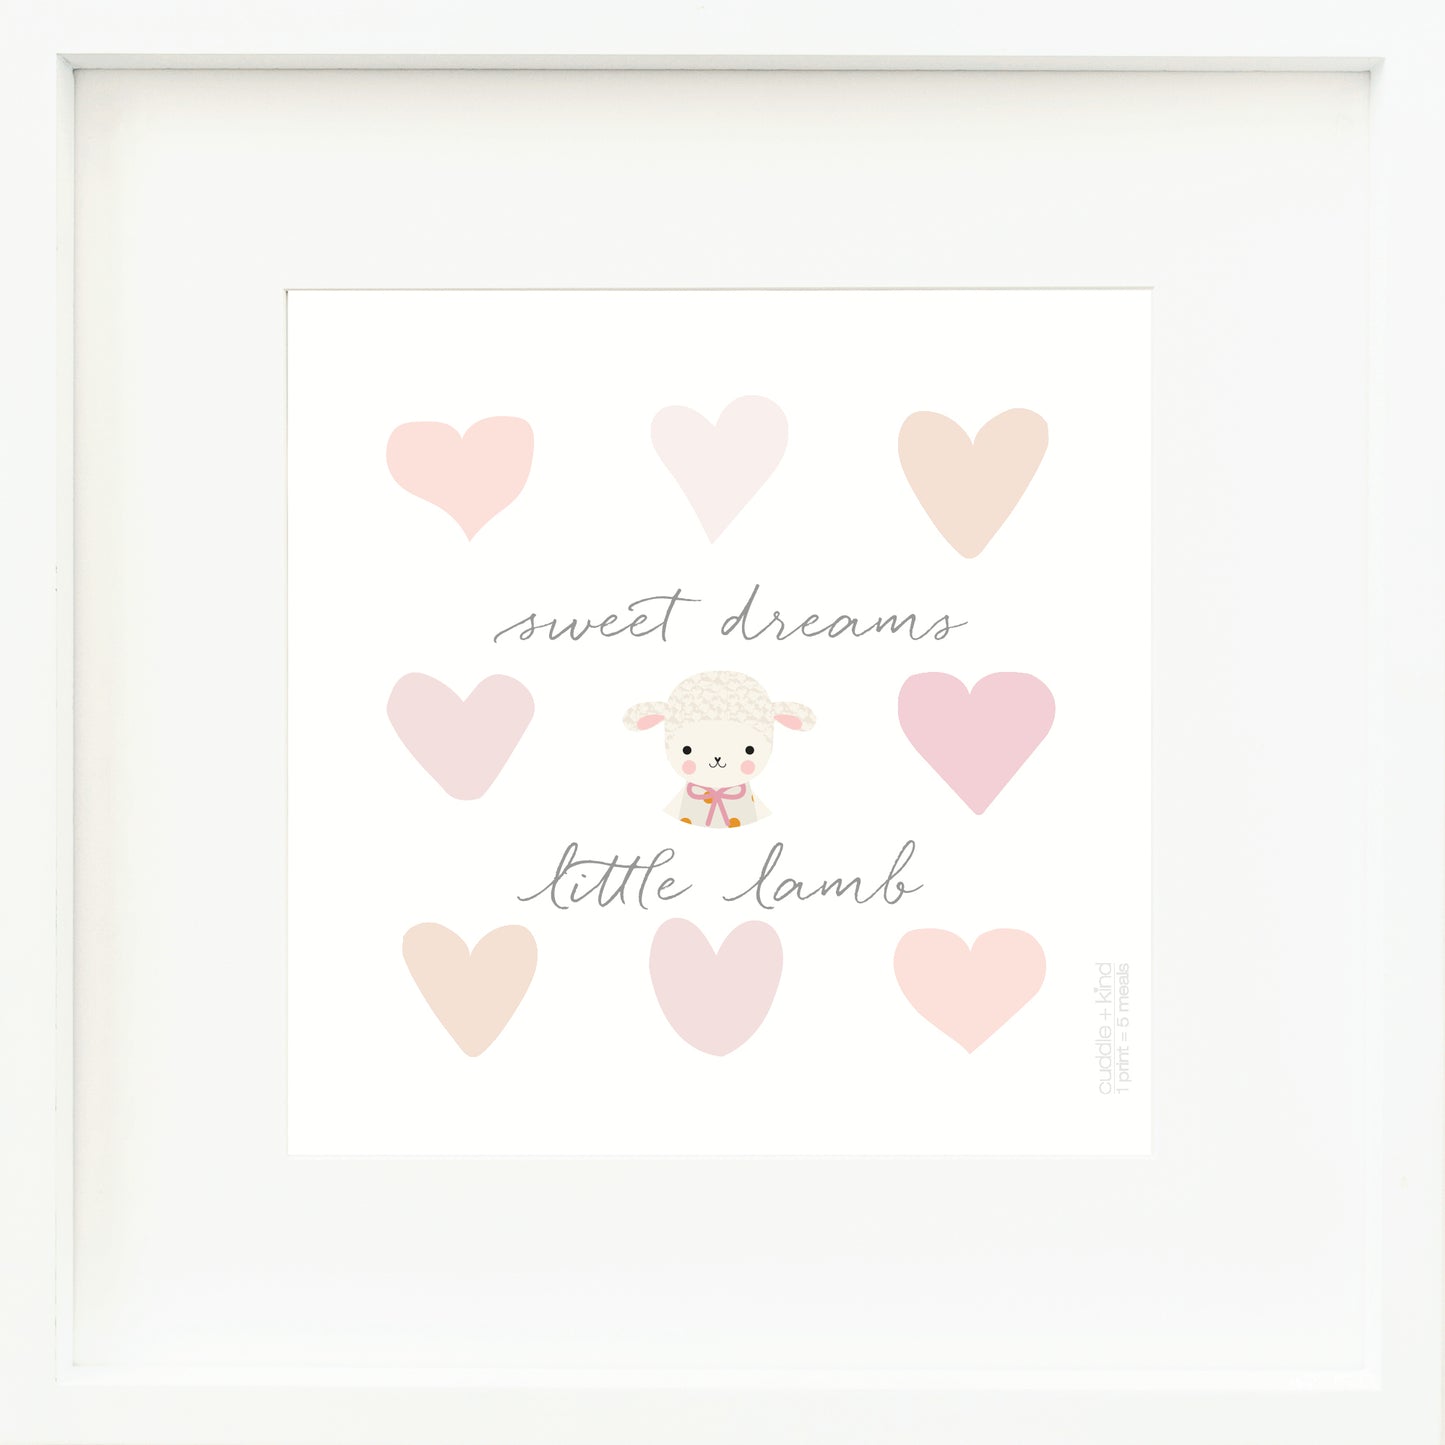 A framed print with a drawing of Lucy the lamb and text that says “Sweet dreams, little lamb.”